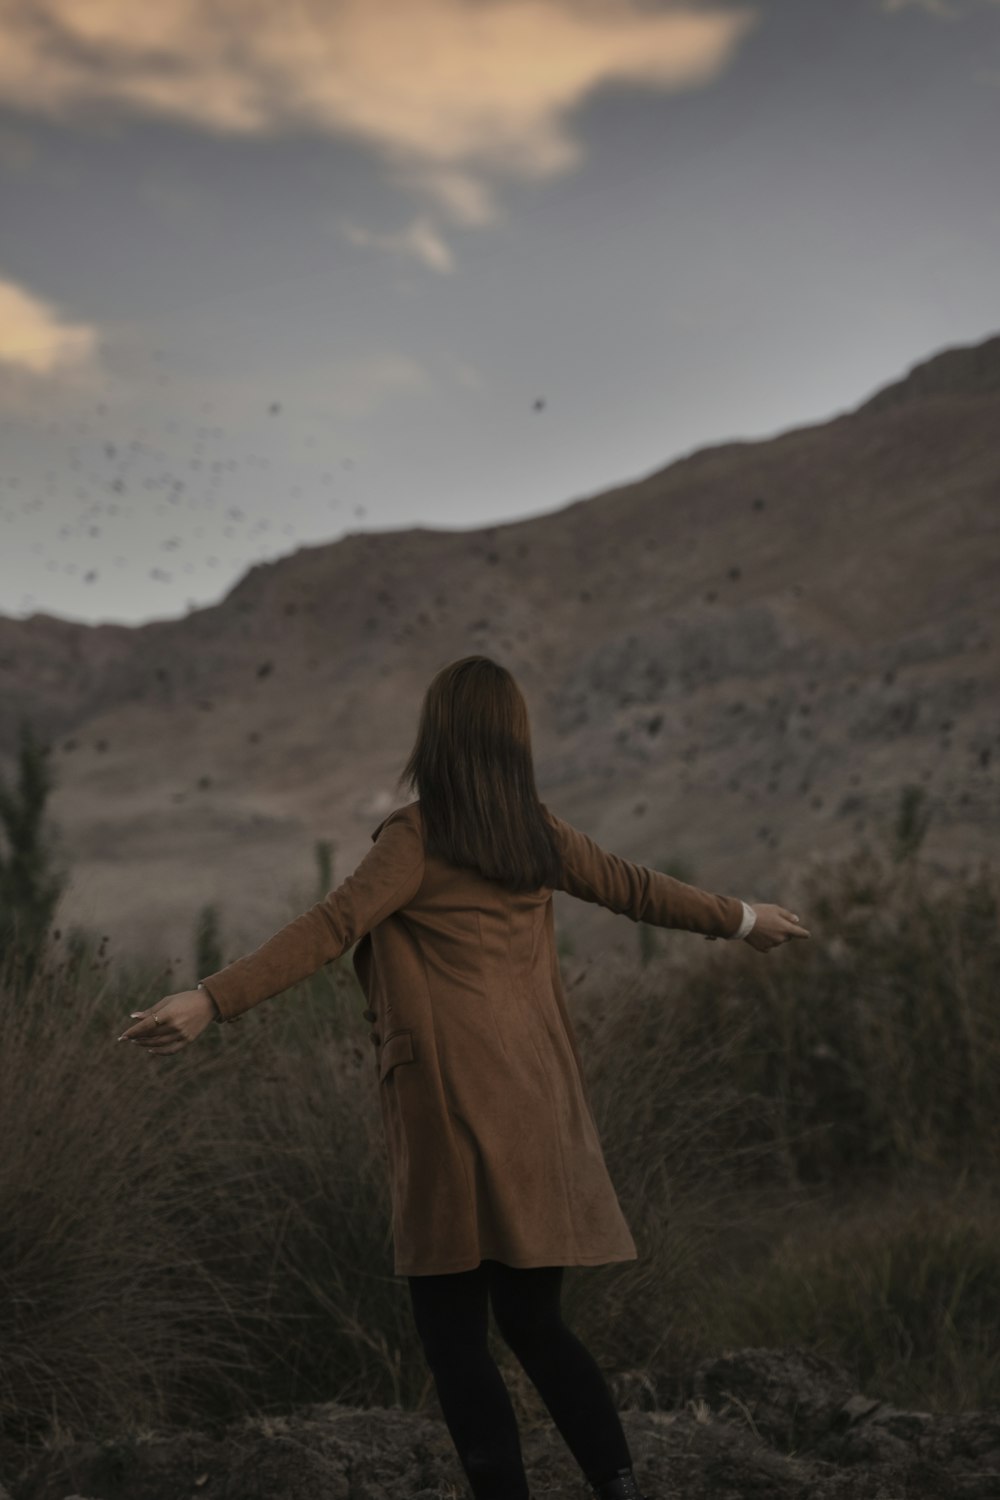 a woman standing in a field with her arms outstretched